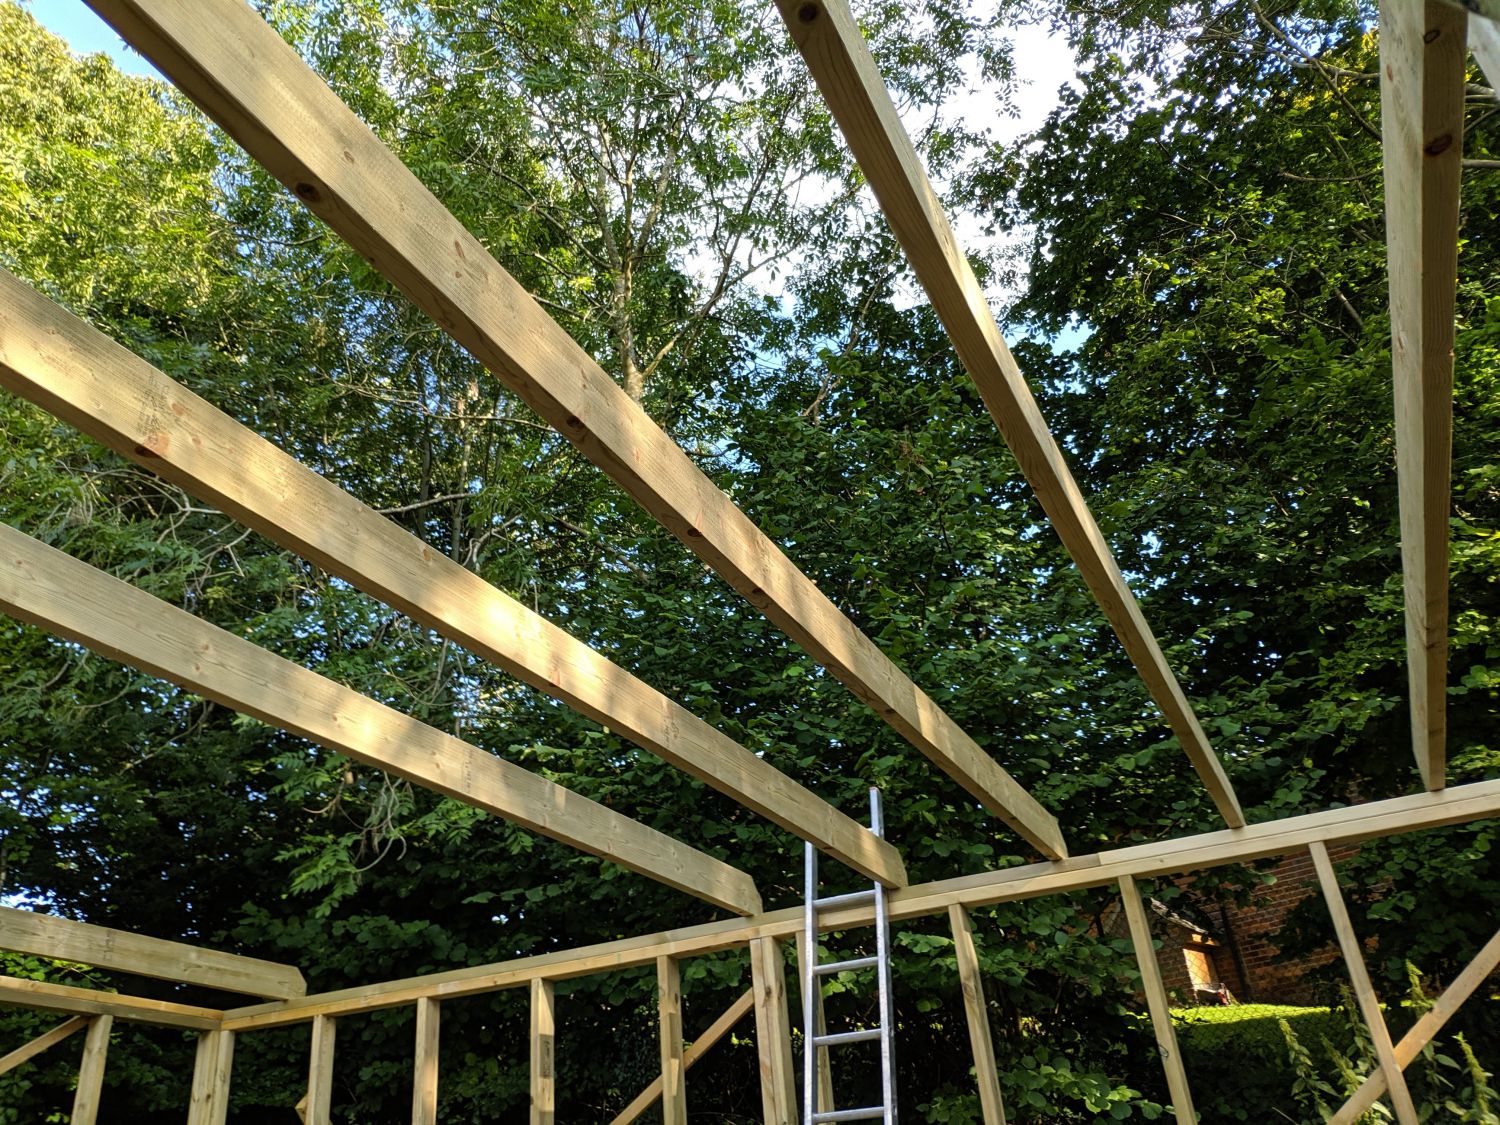 Framing the roof – Dominic Dale